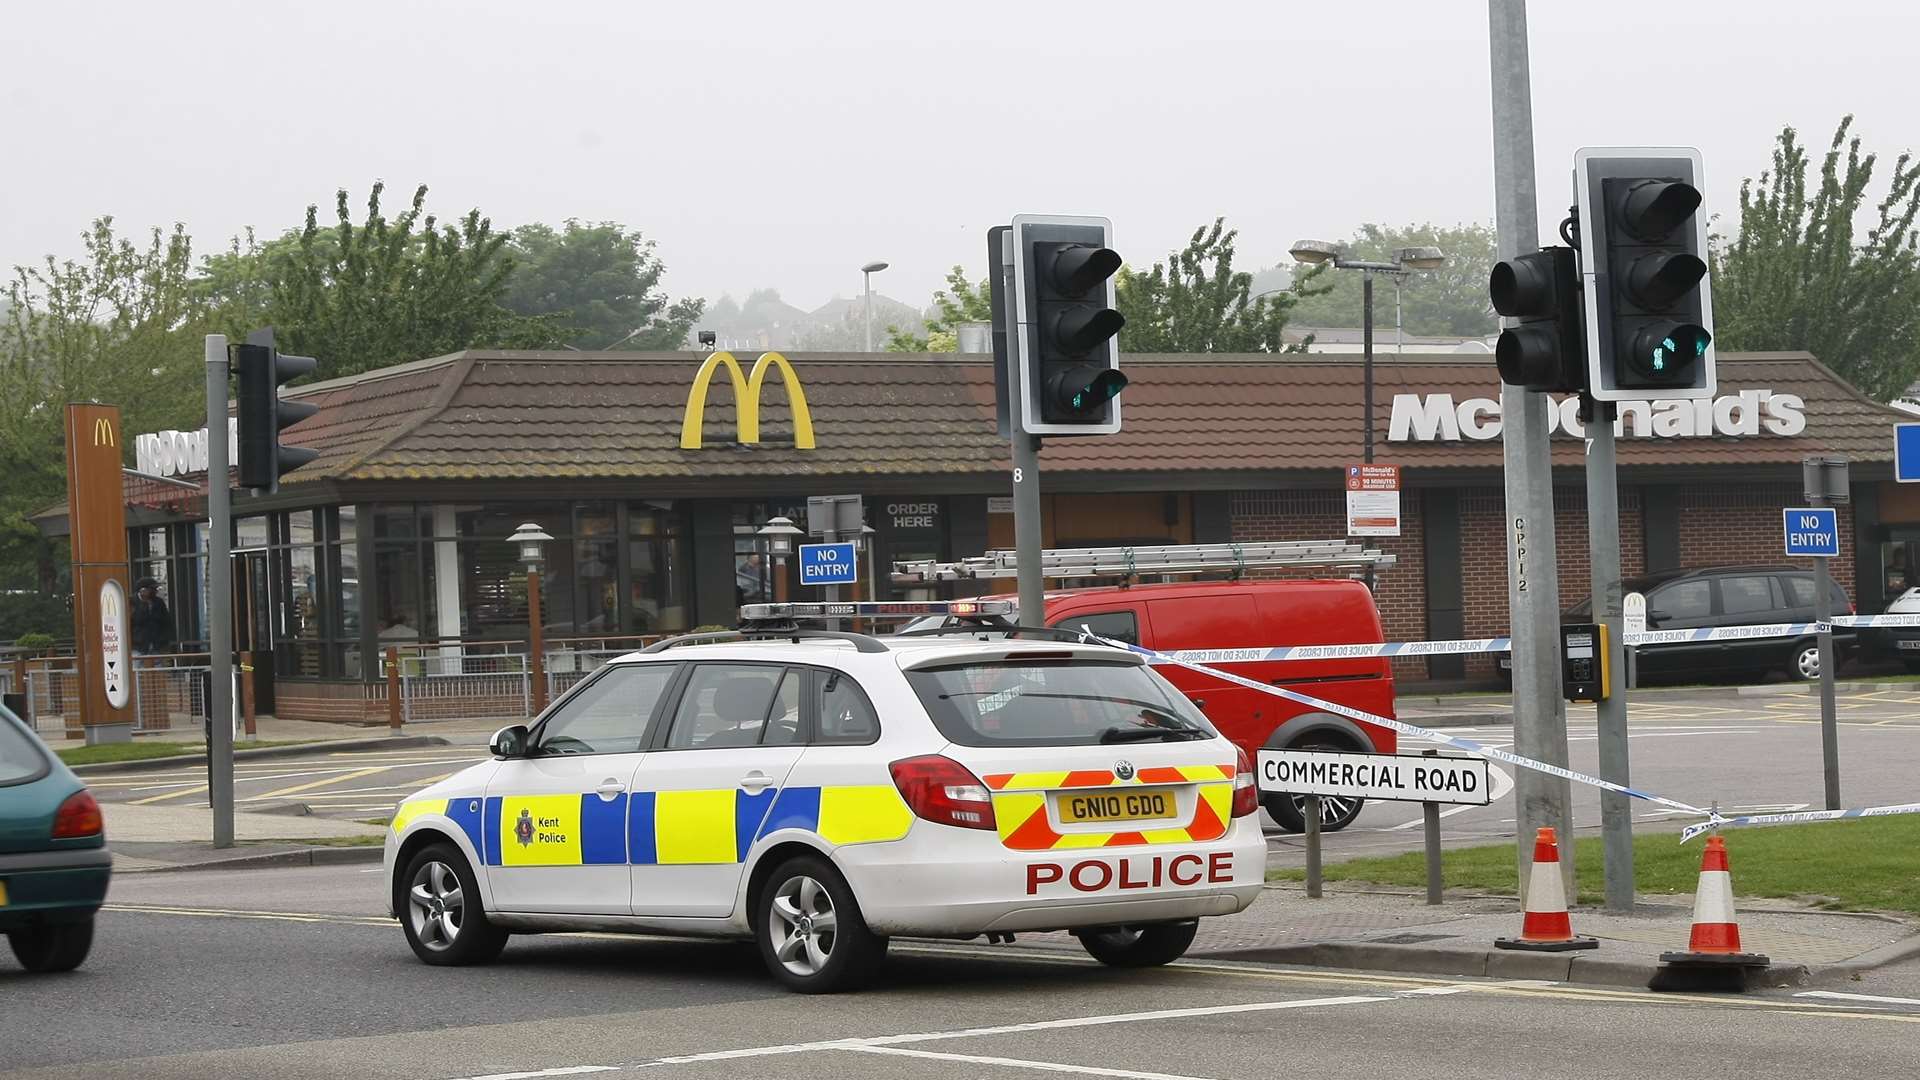 Ryan Sadler was attacked at McDonald's in Commercial Road, Strood. Police attended: stock image